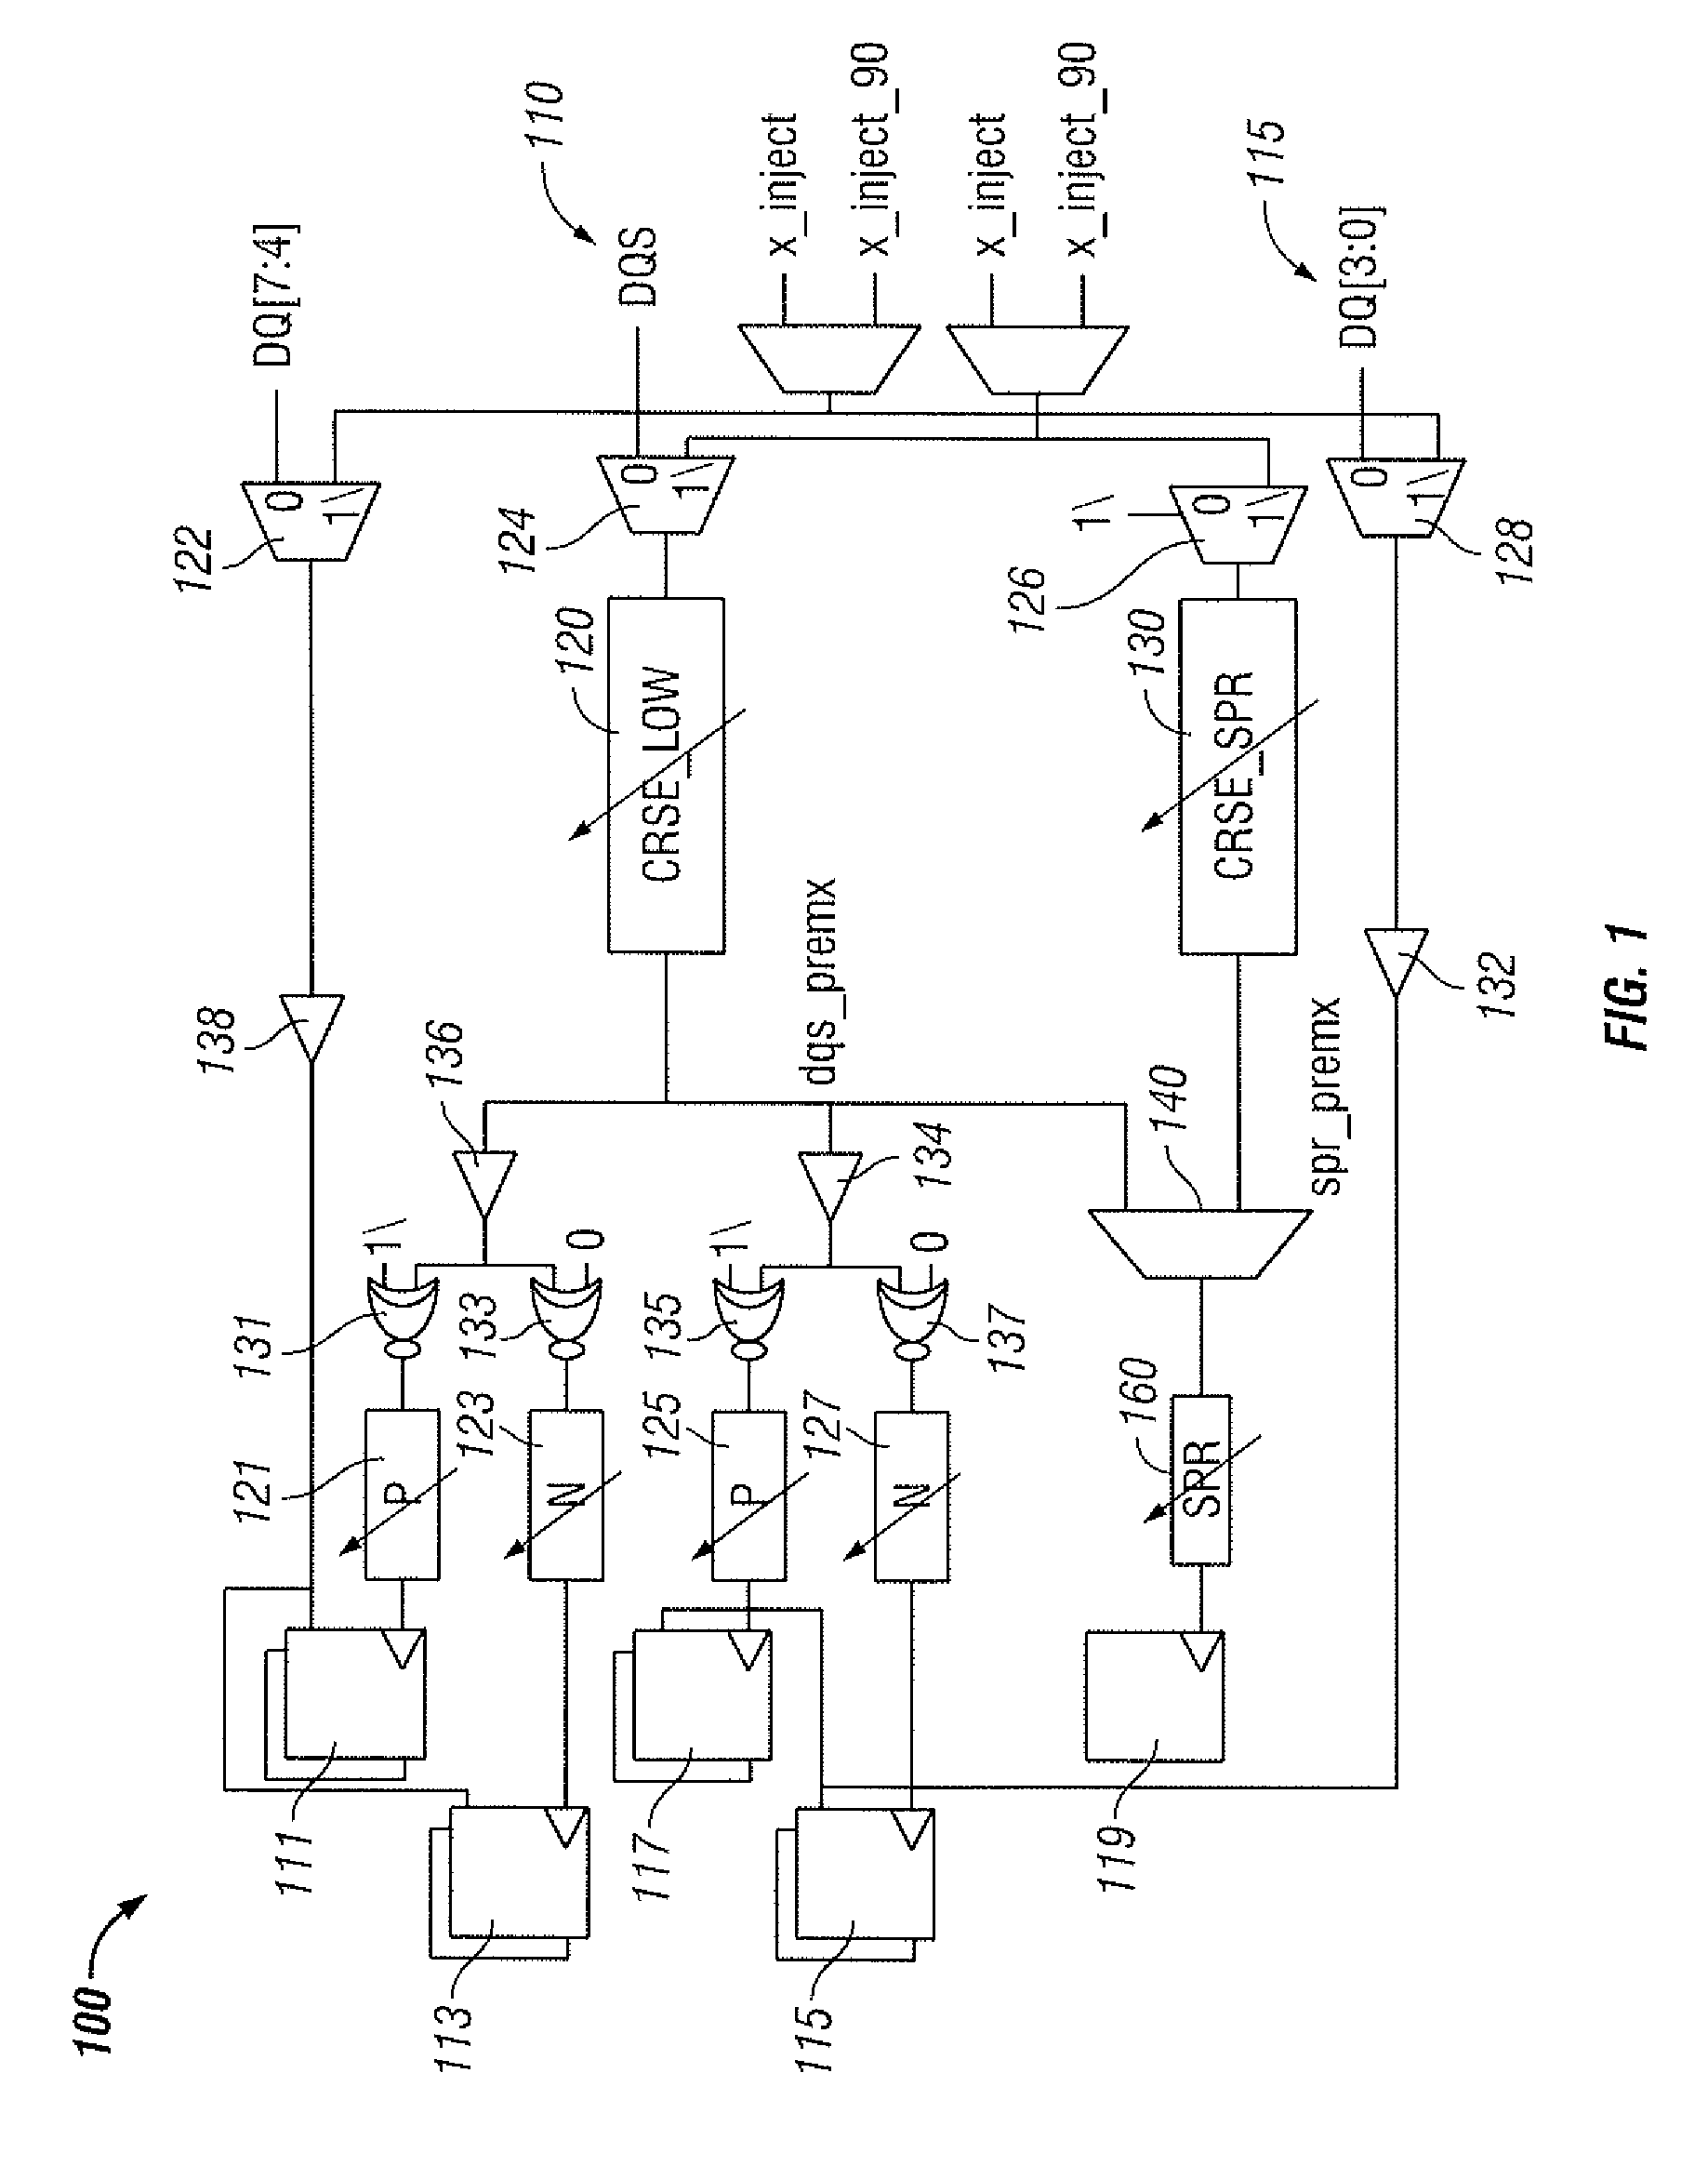 Non-linear common coarse delay system and method for delaying data strobe